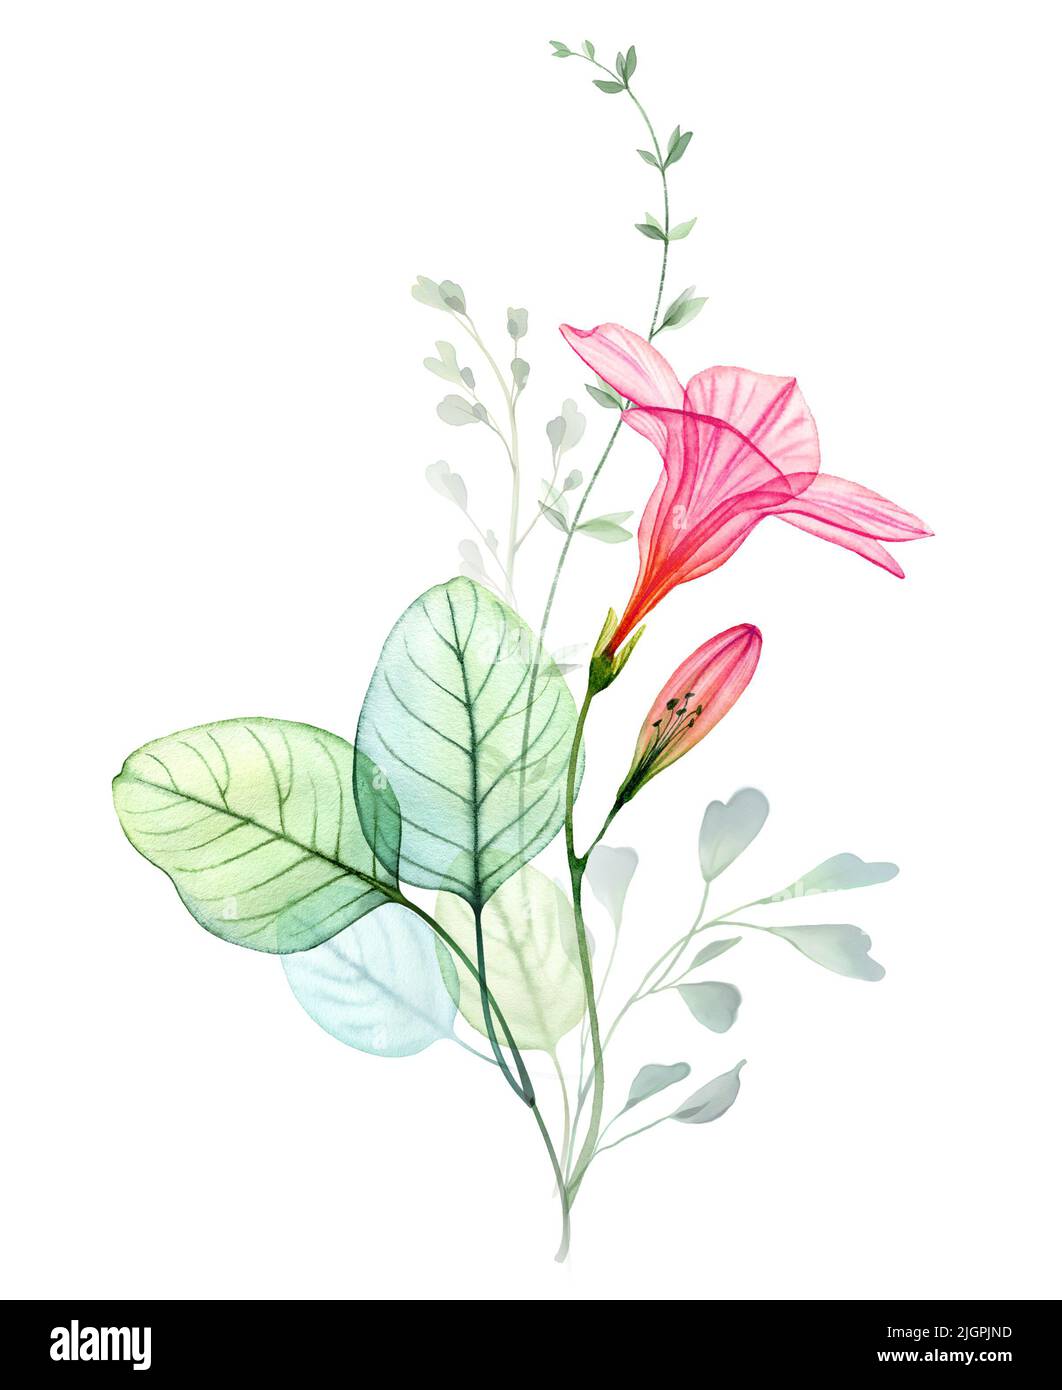 Watercolor transparent hibiscus flower, eucalyptus branches. Colourful tropical bouquet isolated on white. Botanical abstract floral illustration for Stock Photo